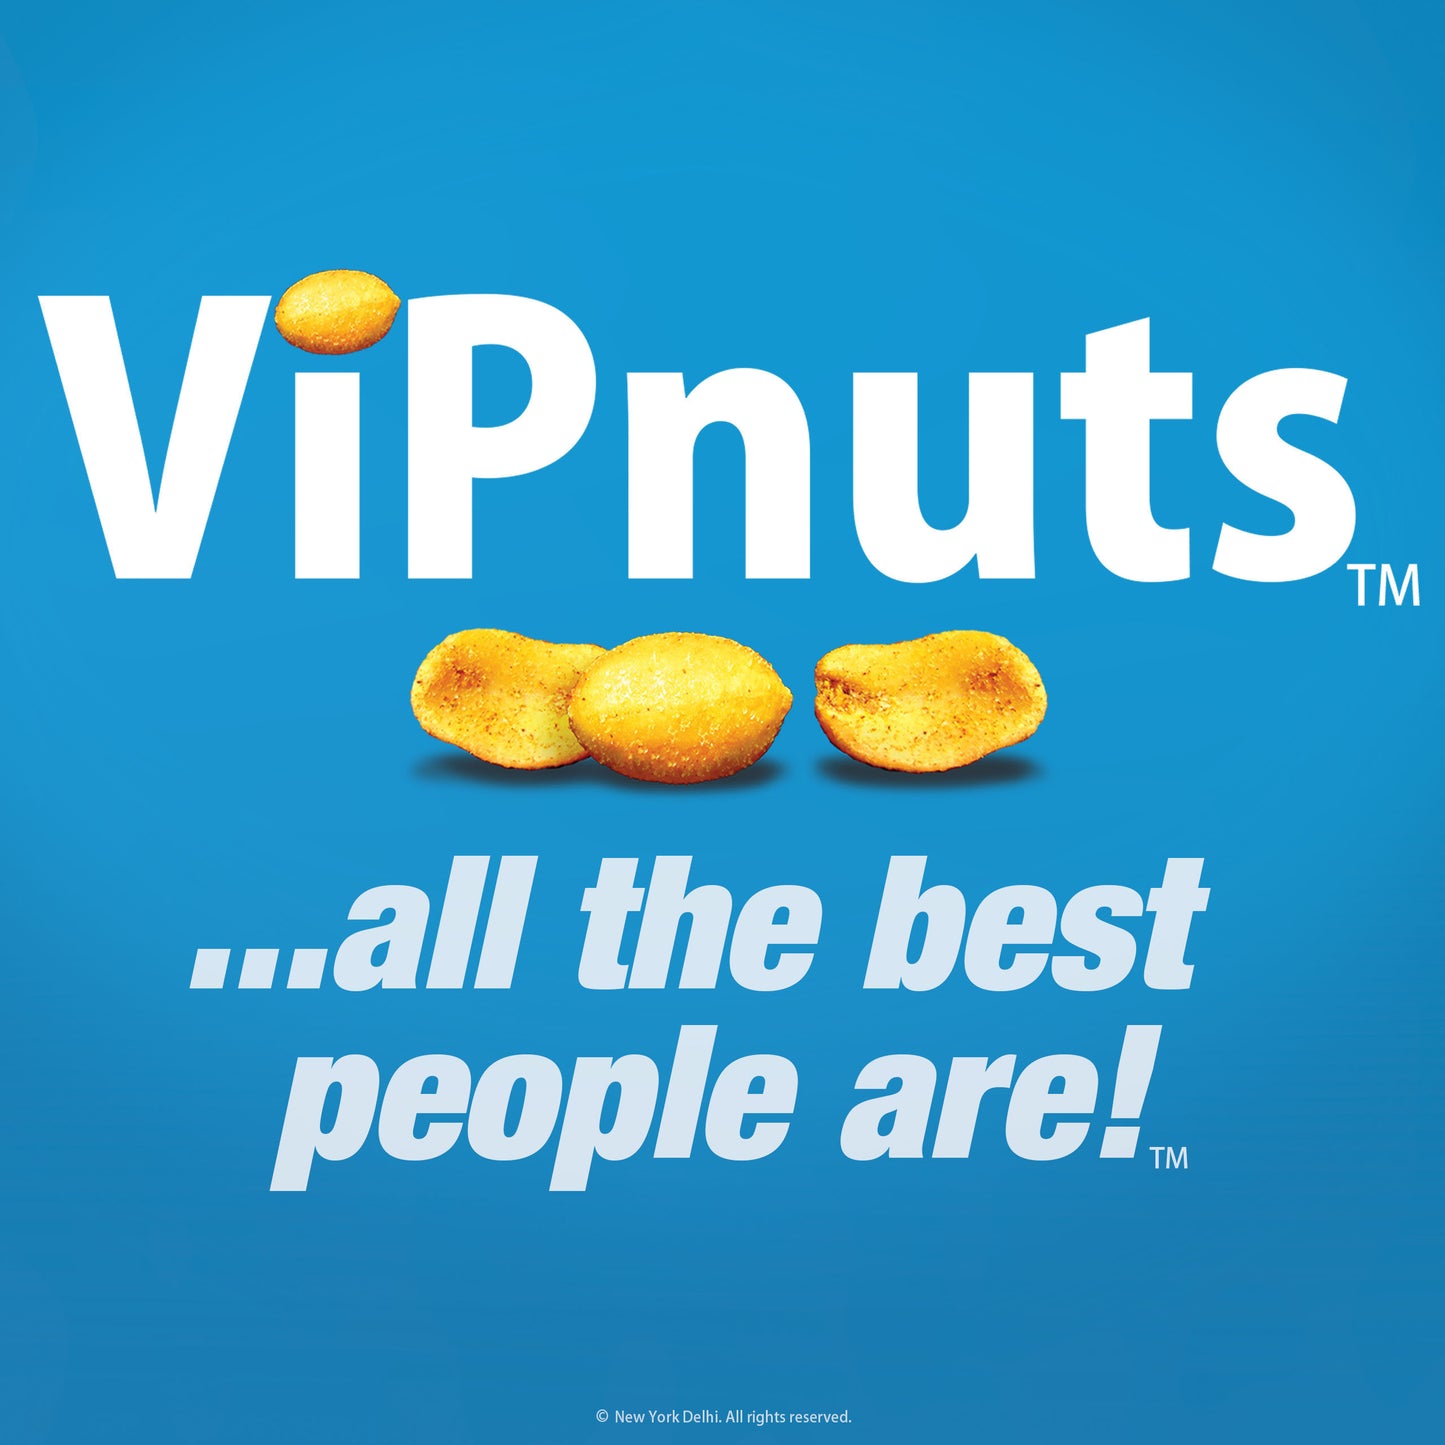 ViPnuts Selection Box peanuts 18 packs, 6 Flavours, 3 of each case